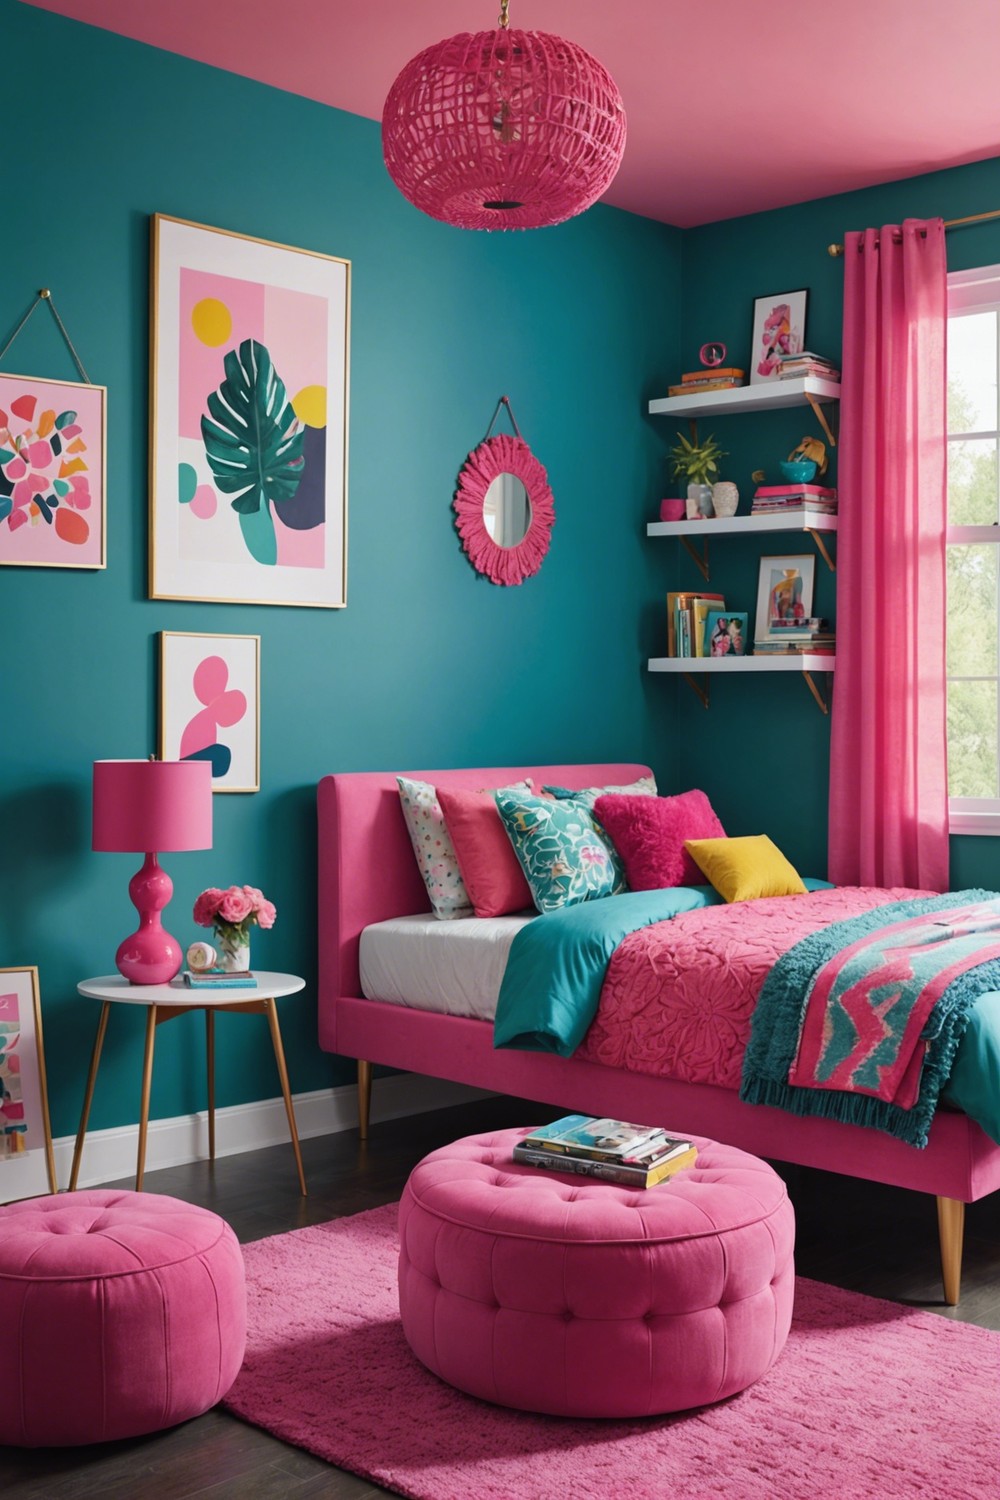 Bold and Colorful: Teal with Bright Pink Accents